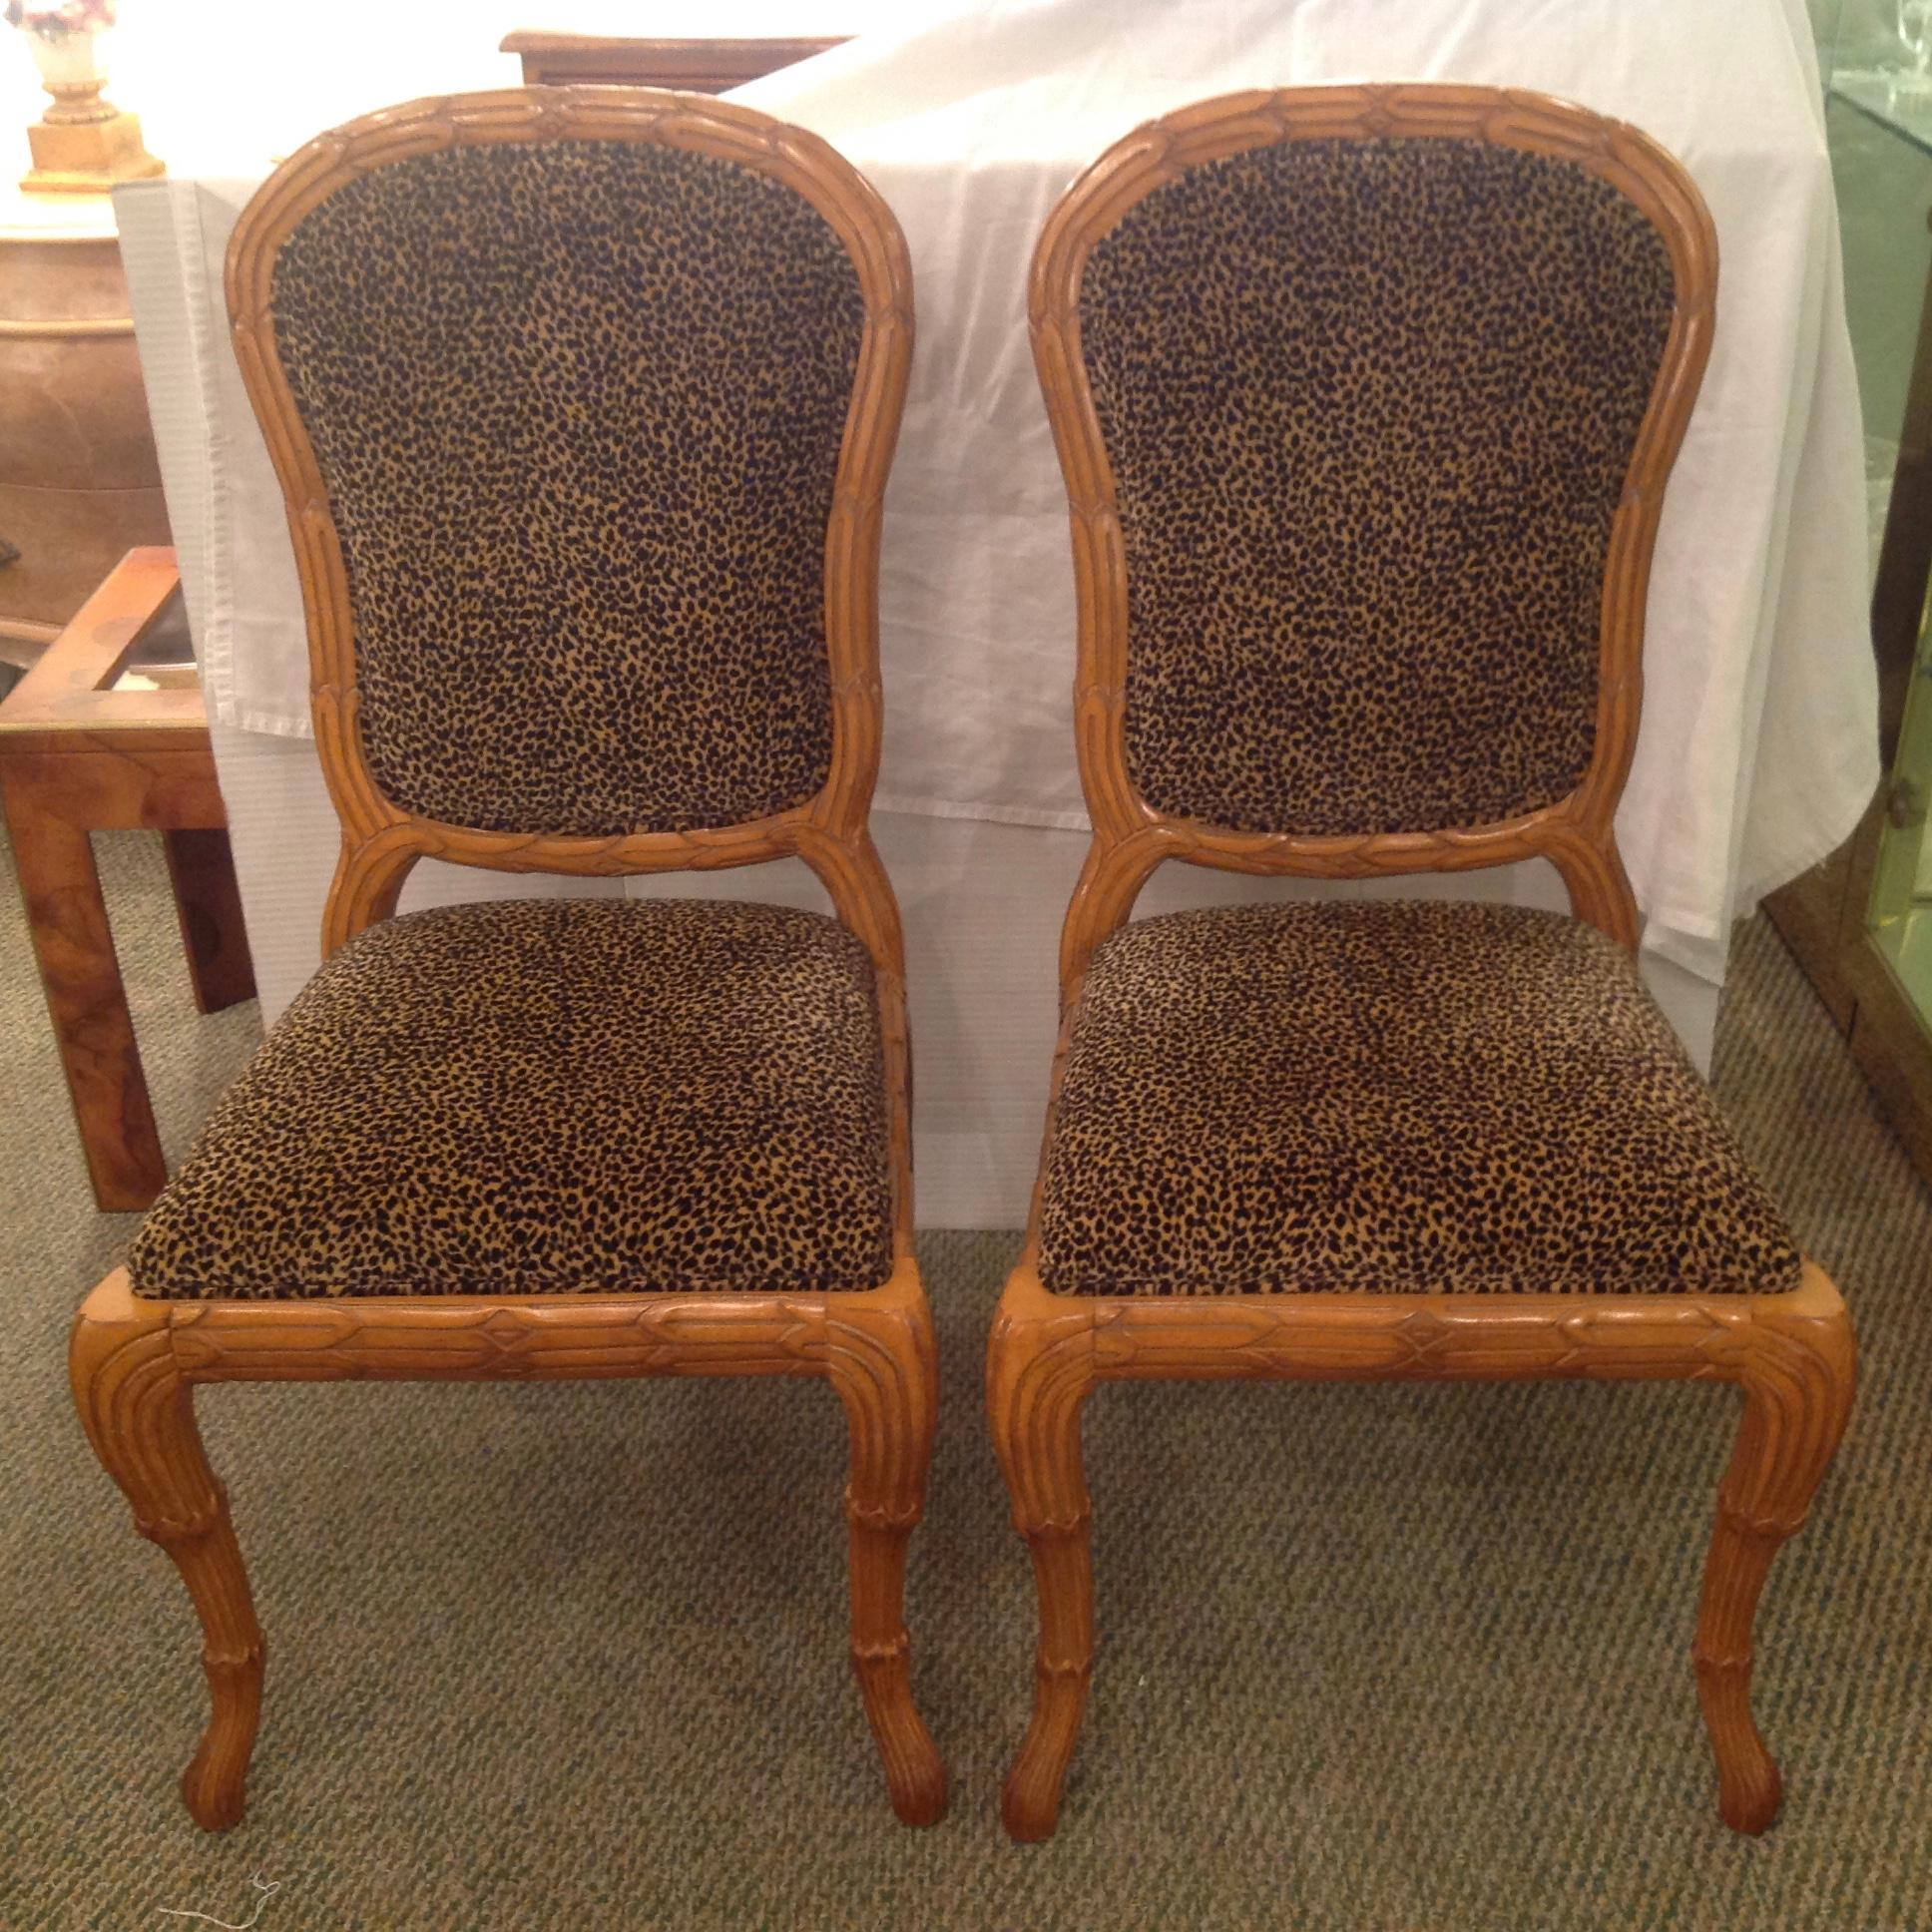 Stunning faux bois carving, together with exiting faux leopard seats and backs.
Superb quality and style.